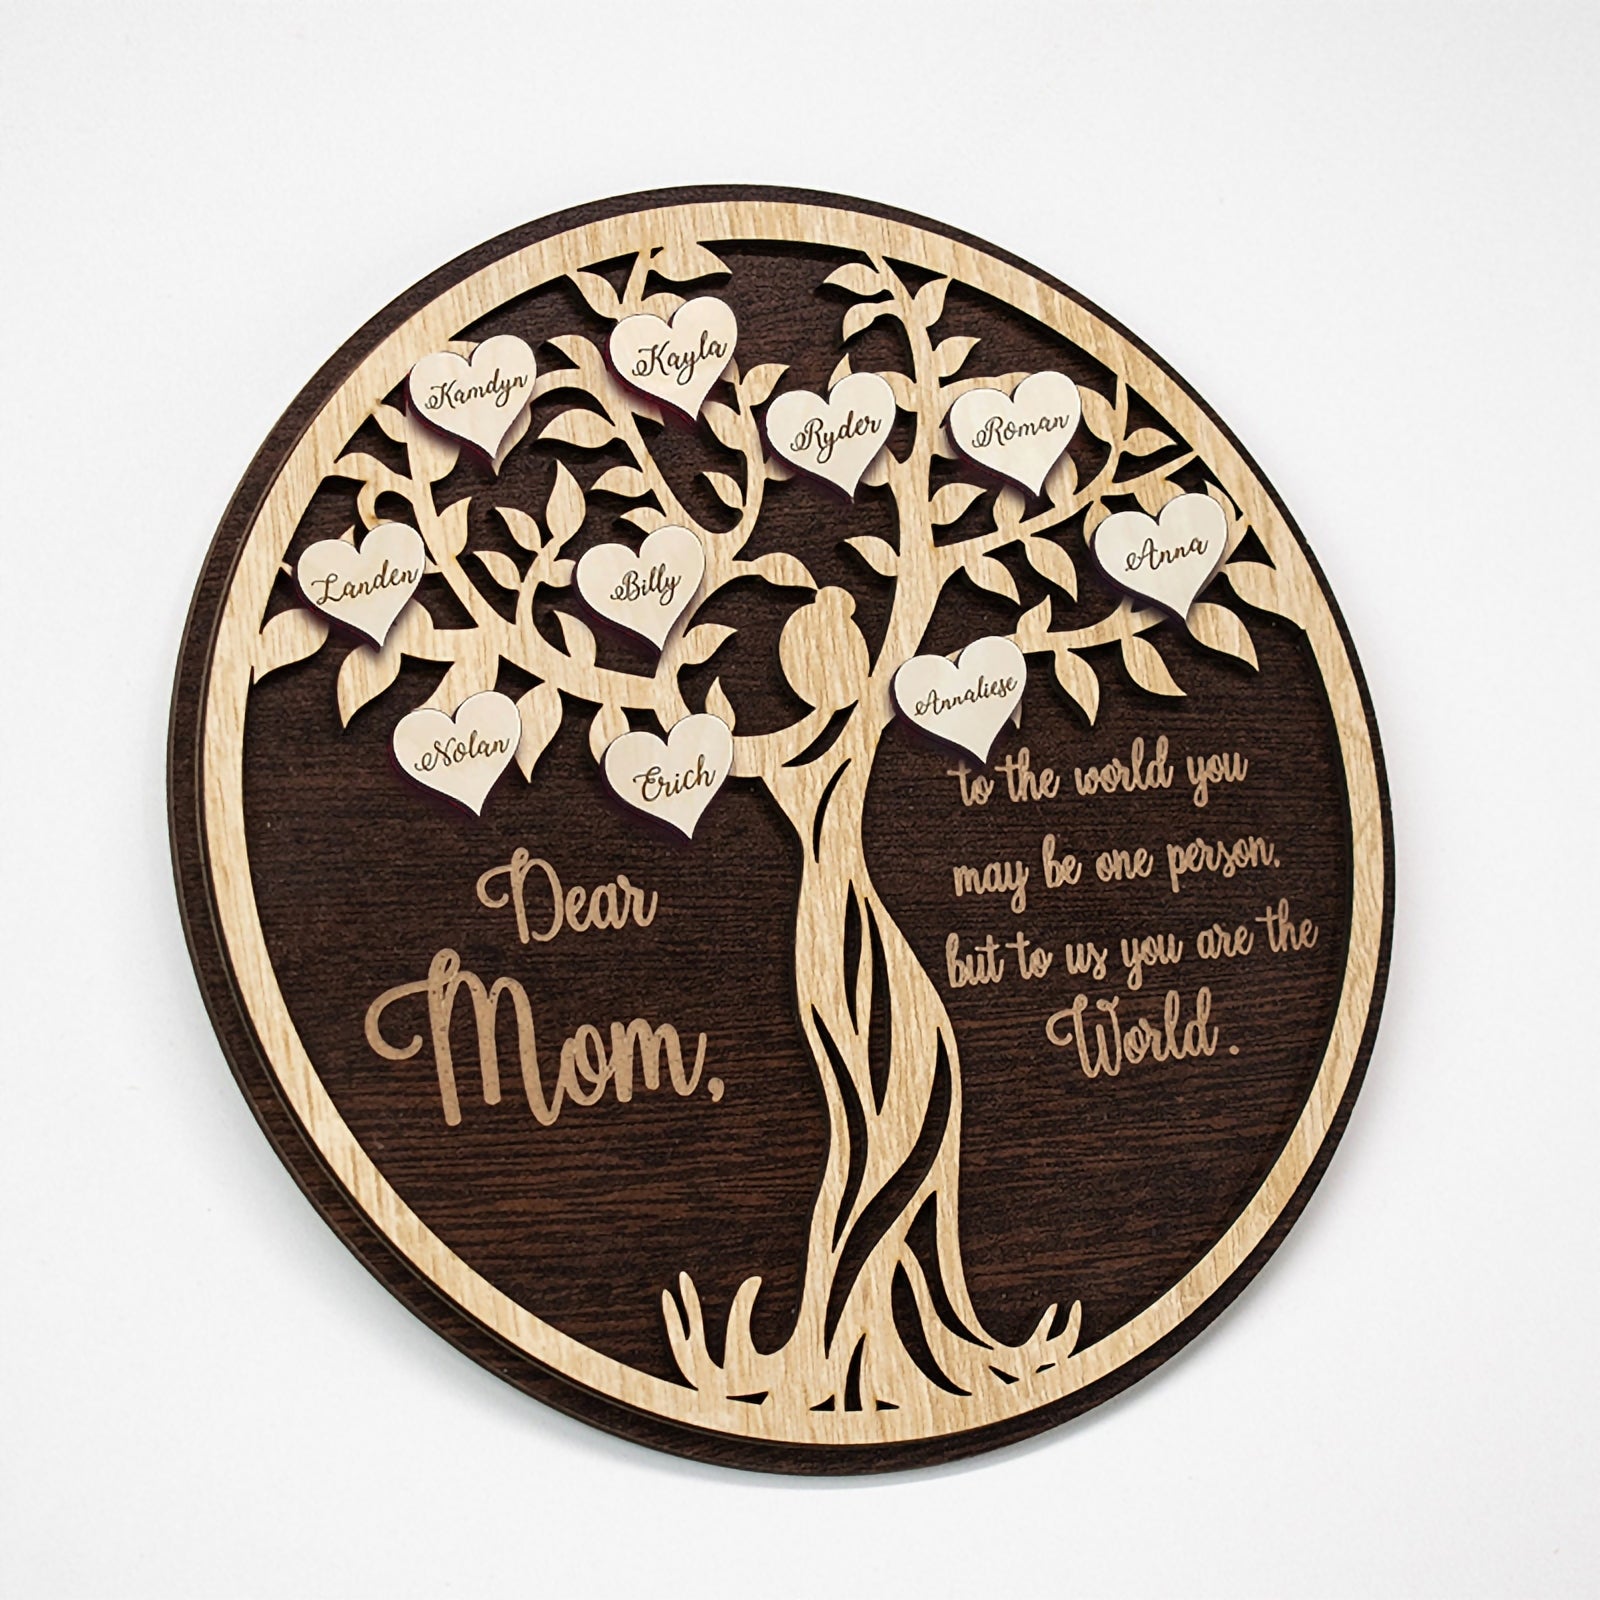 Smoky Tree Madre Gifts - 7x9 in